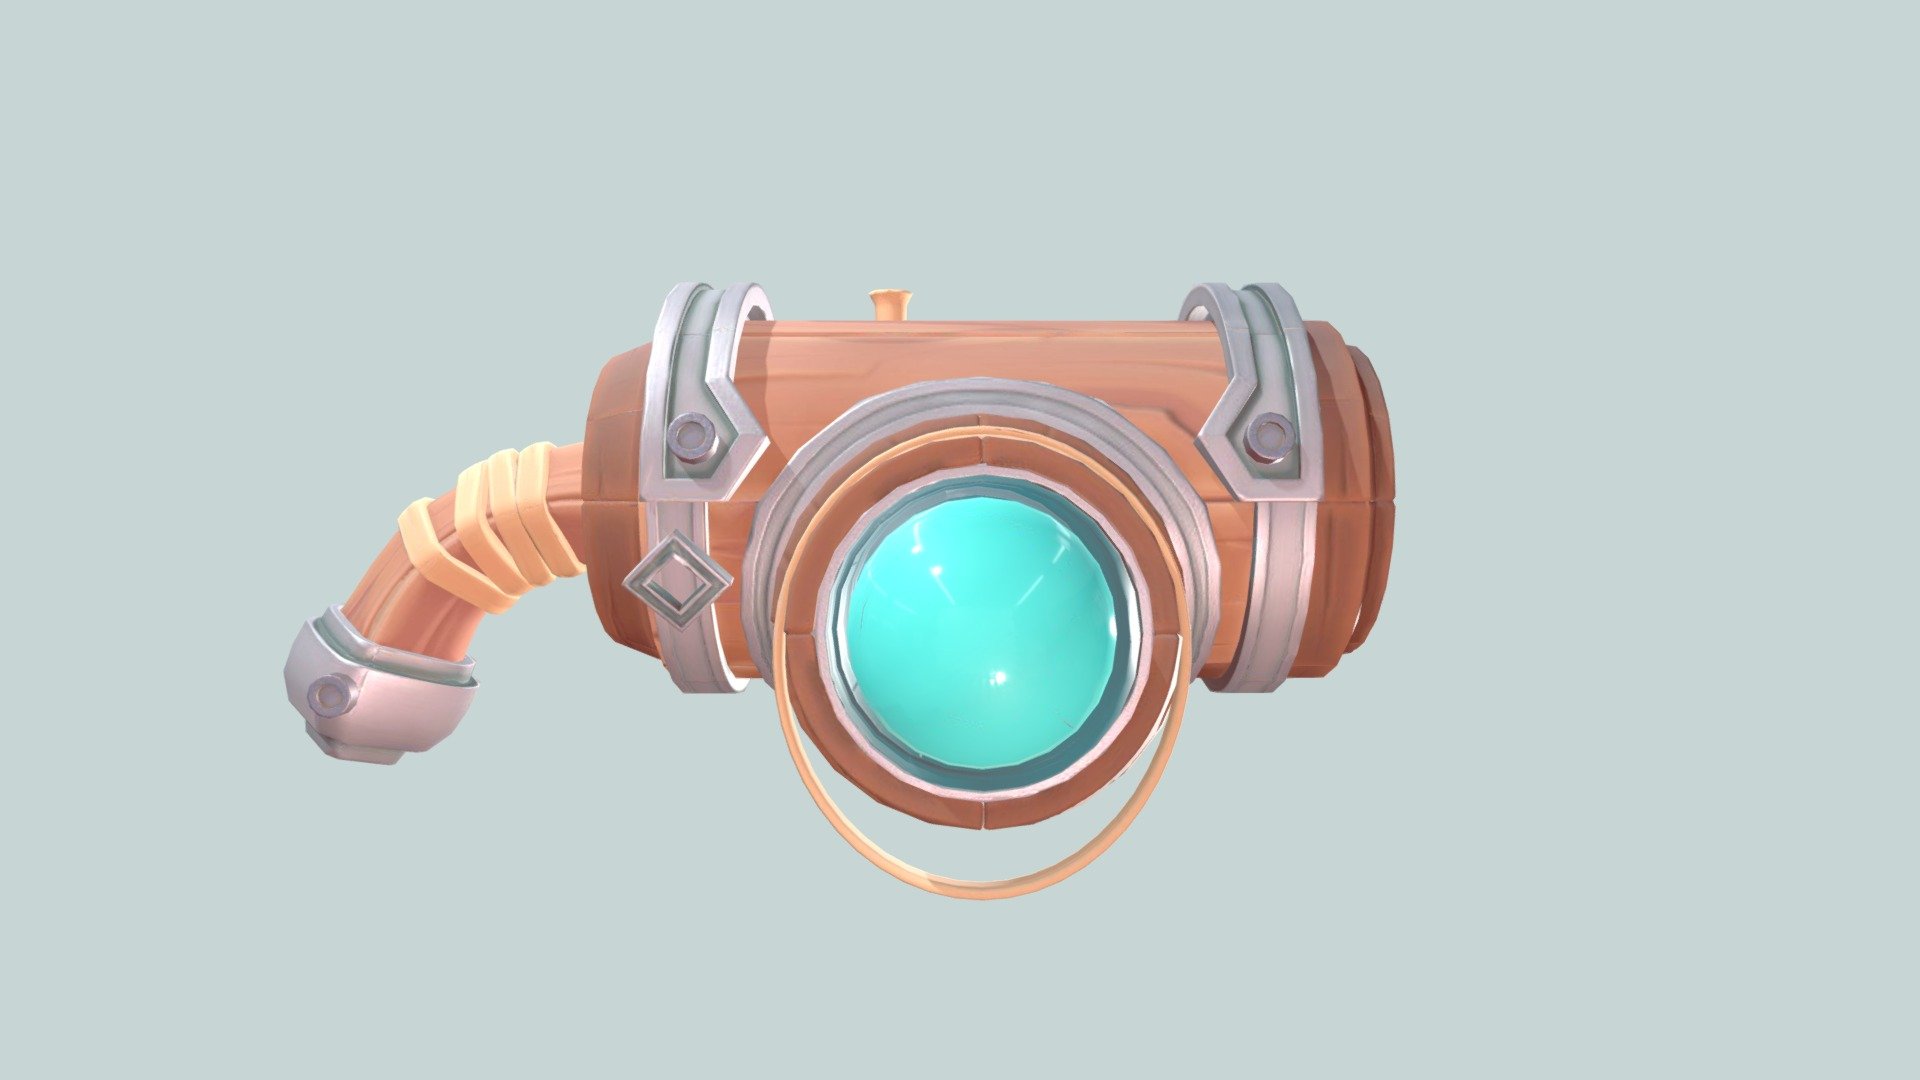 This is the potion gun used in our in-development game &ldquo;Brew